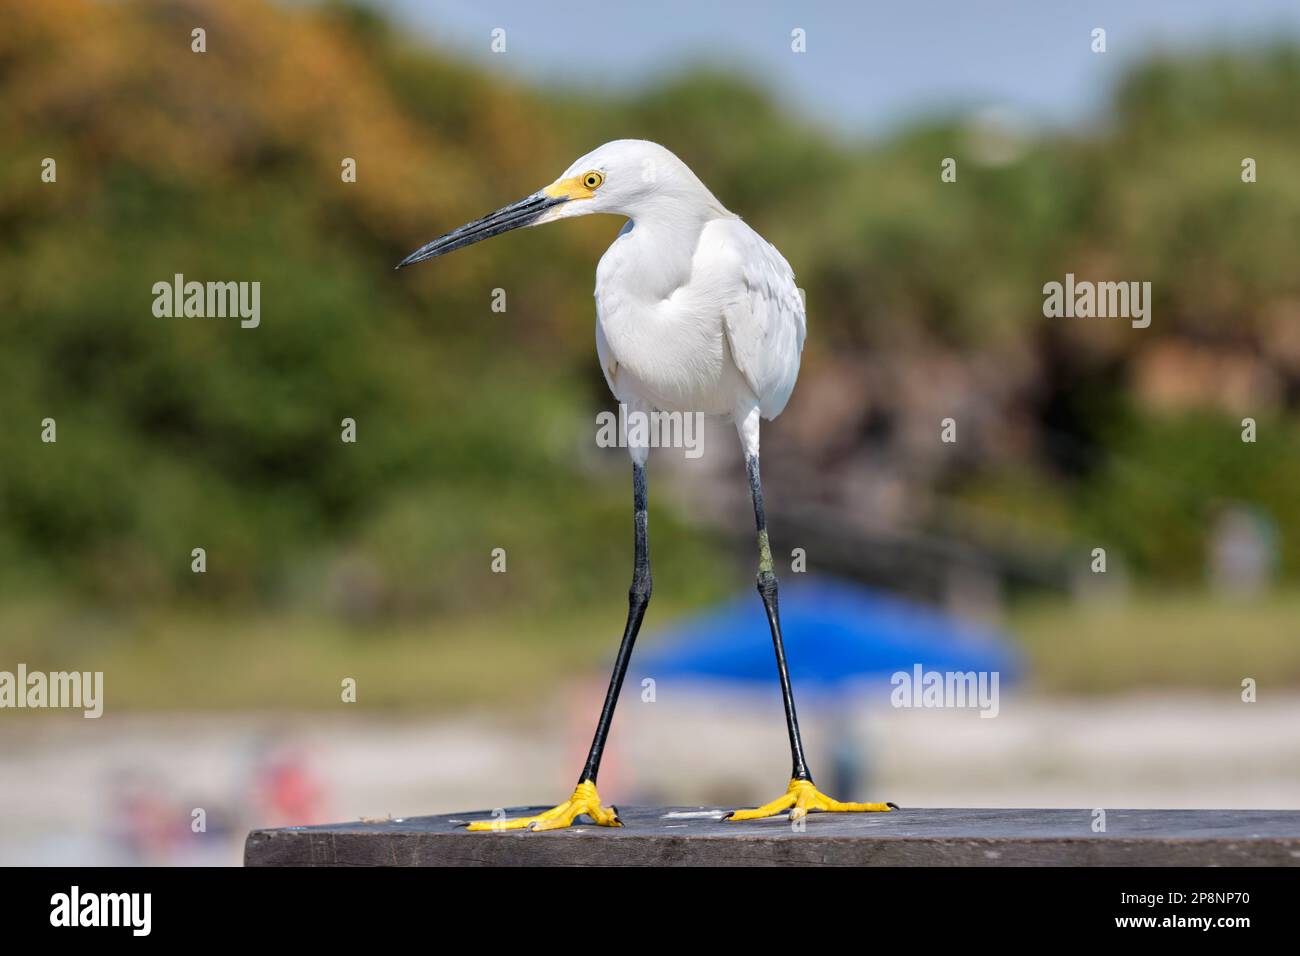 Which White Bird Is That?! Is It An Egret? Or A Heron? Or..?